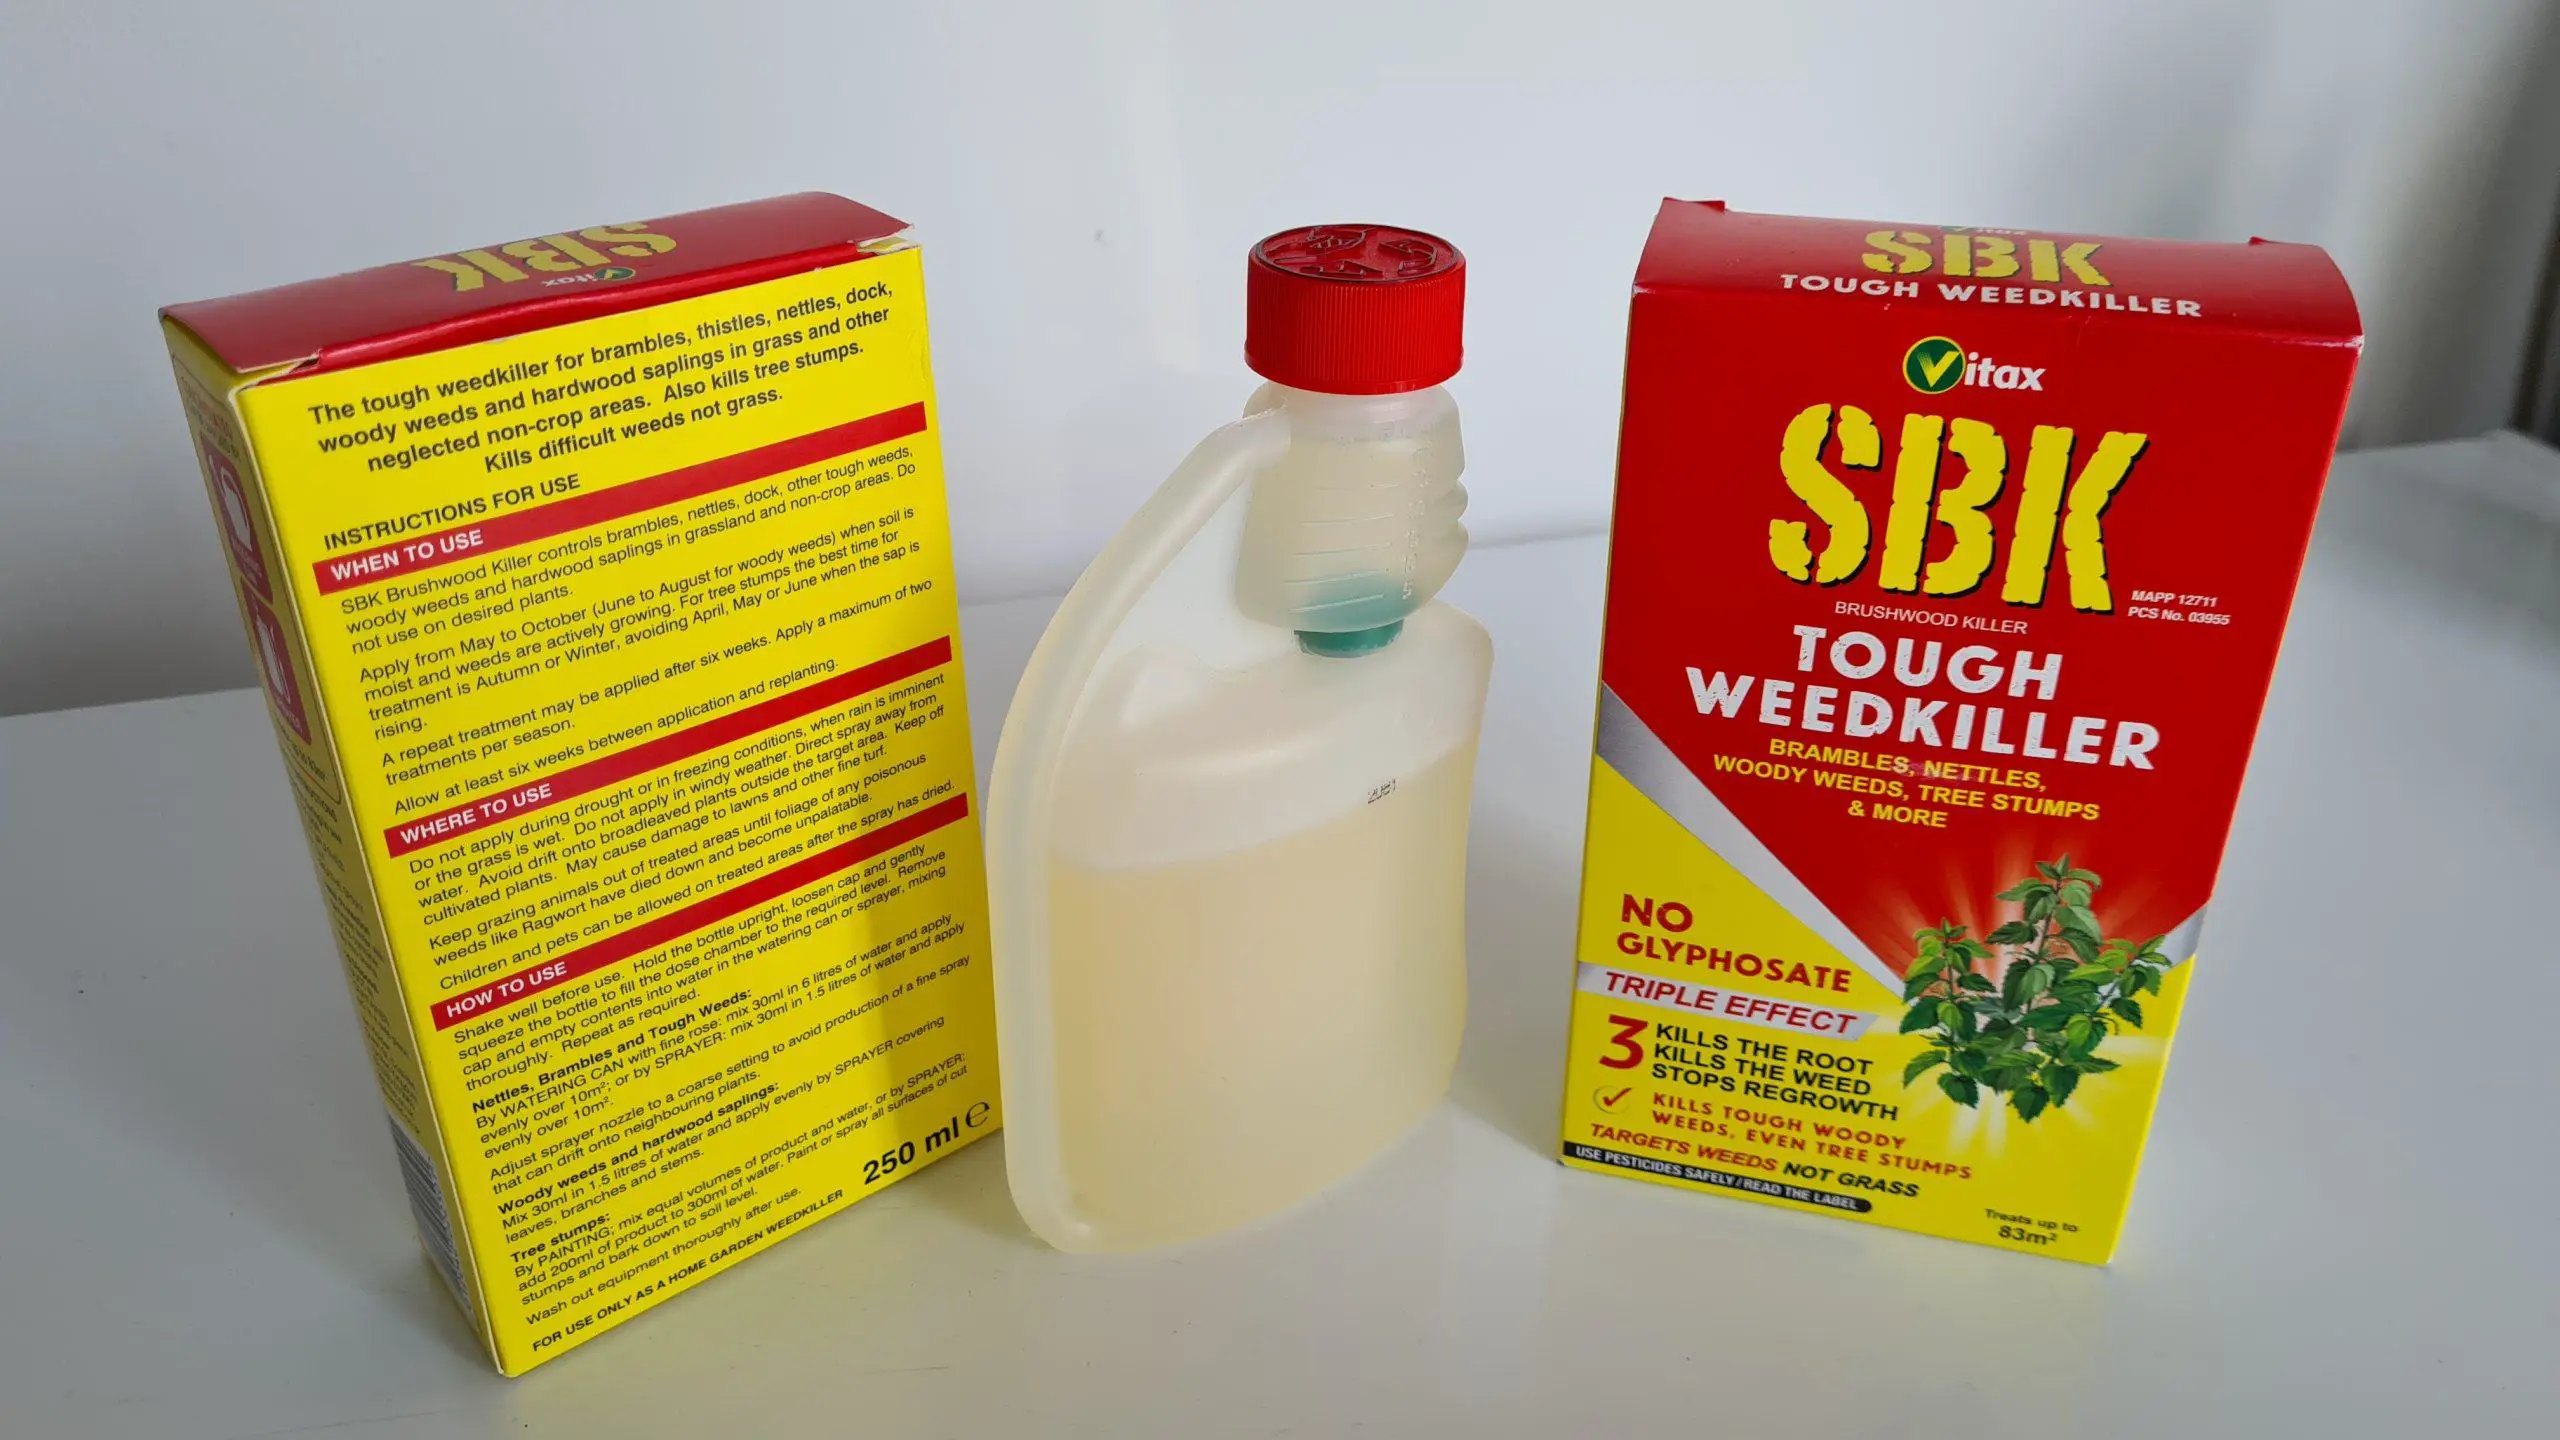 SBK weed killer packaging and contents on display